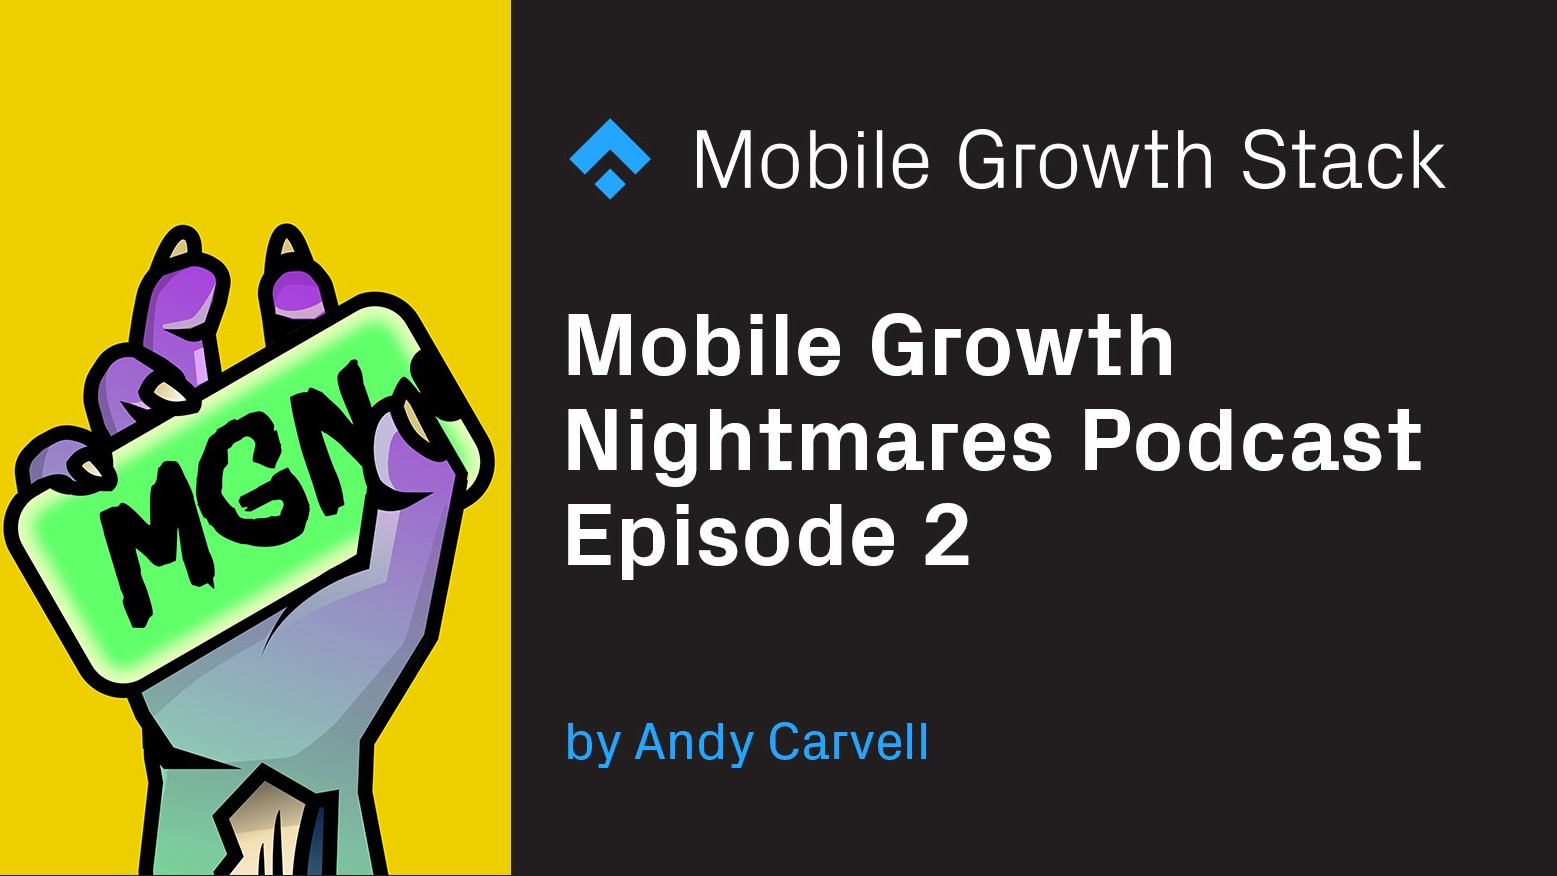 Mobile Growth Nightmares Podcast #2 featuring stories from Duolingo, Hopper, and Tubi TV